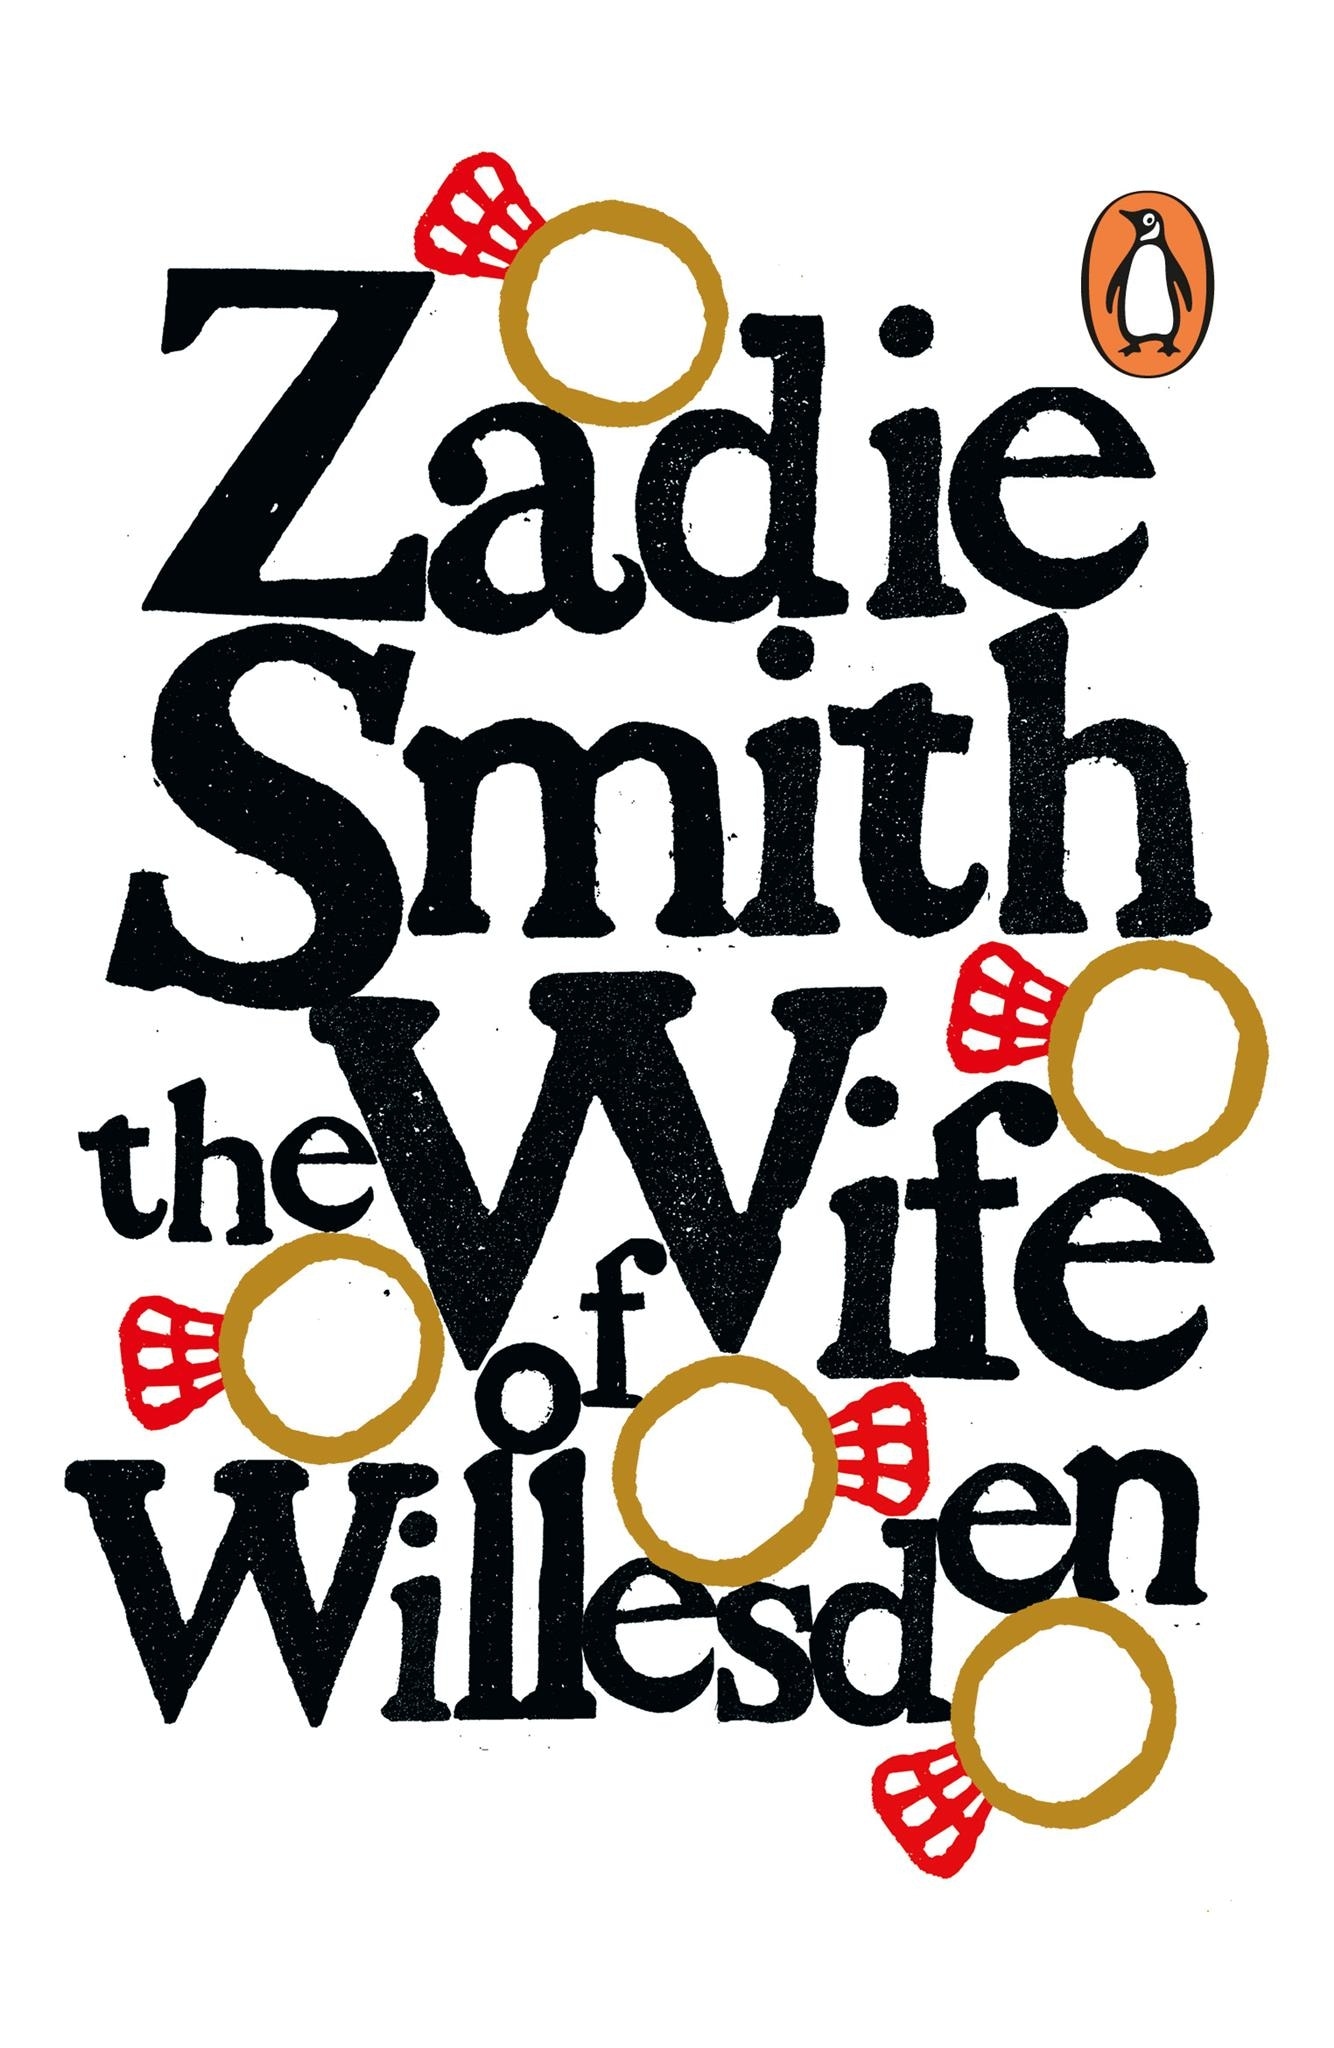 Book “The Wife of Willesden” by Zadie Smith — November 4, 2021